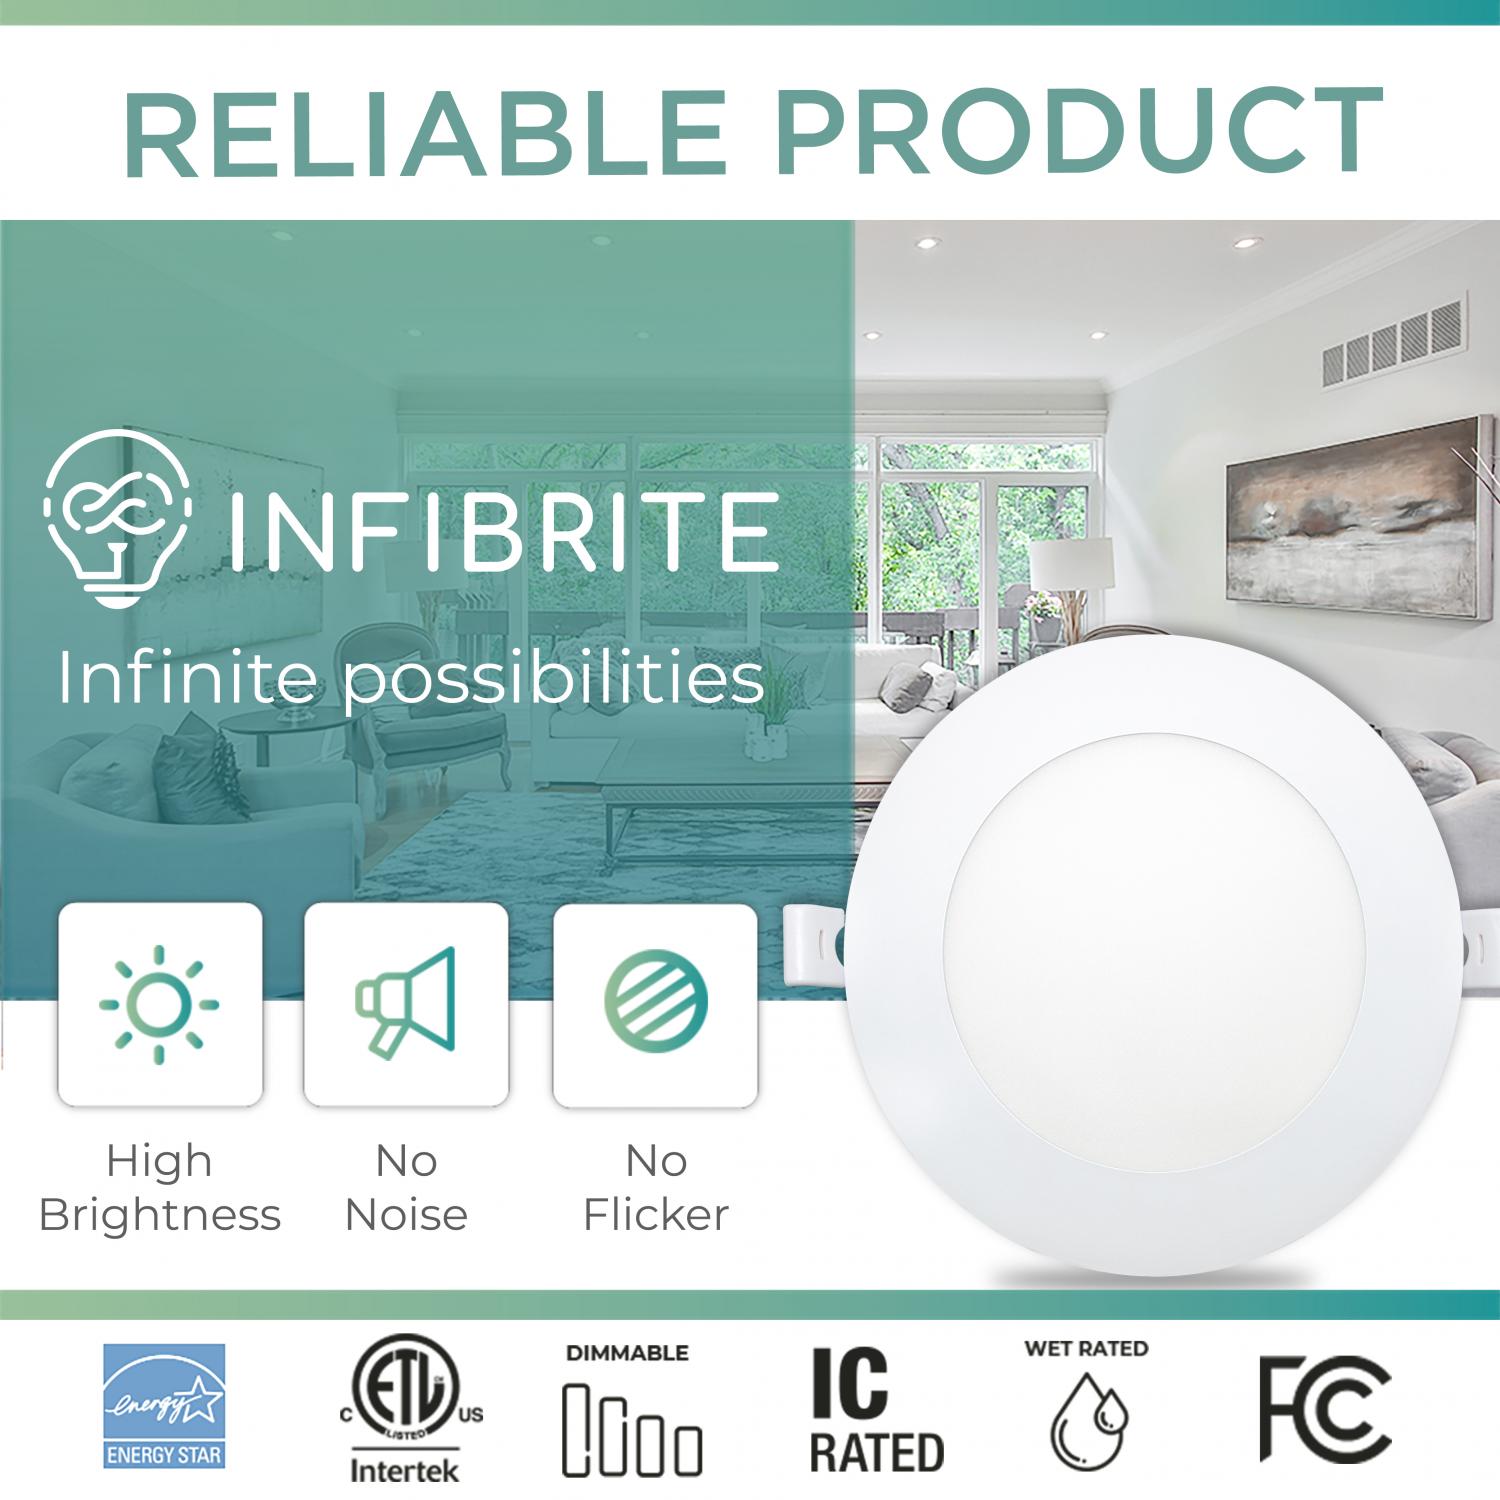 Infibrite 6 Inch 3000K Warm White 12W 1050LM Ultra-Slim LED Ceiling Light with Junction Box, Flush Mount, Dimmable, Fixture for Bedroom, Wet Rated for Bathroom, Easy Install, 110W Eqv, ETL & Energy Star, US Company (24 Pack)